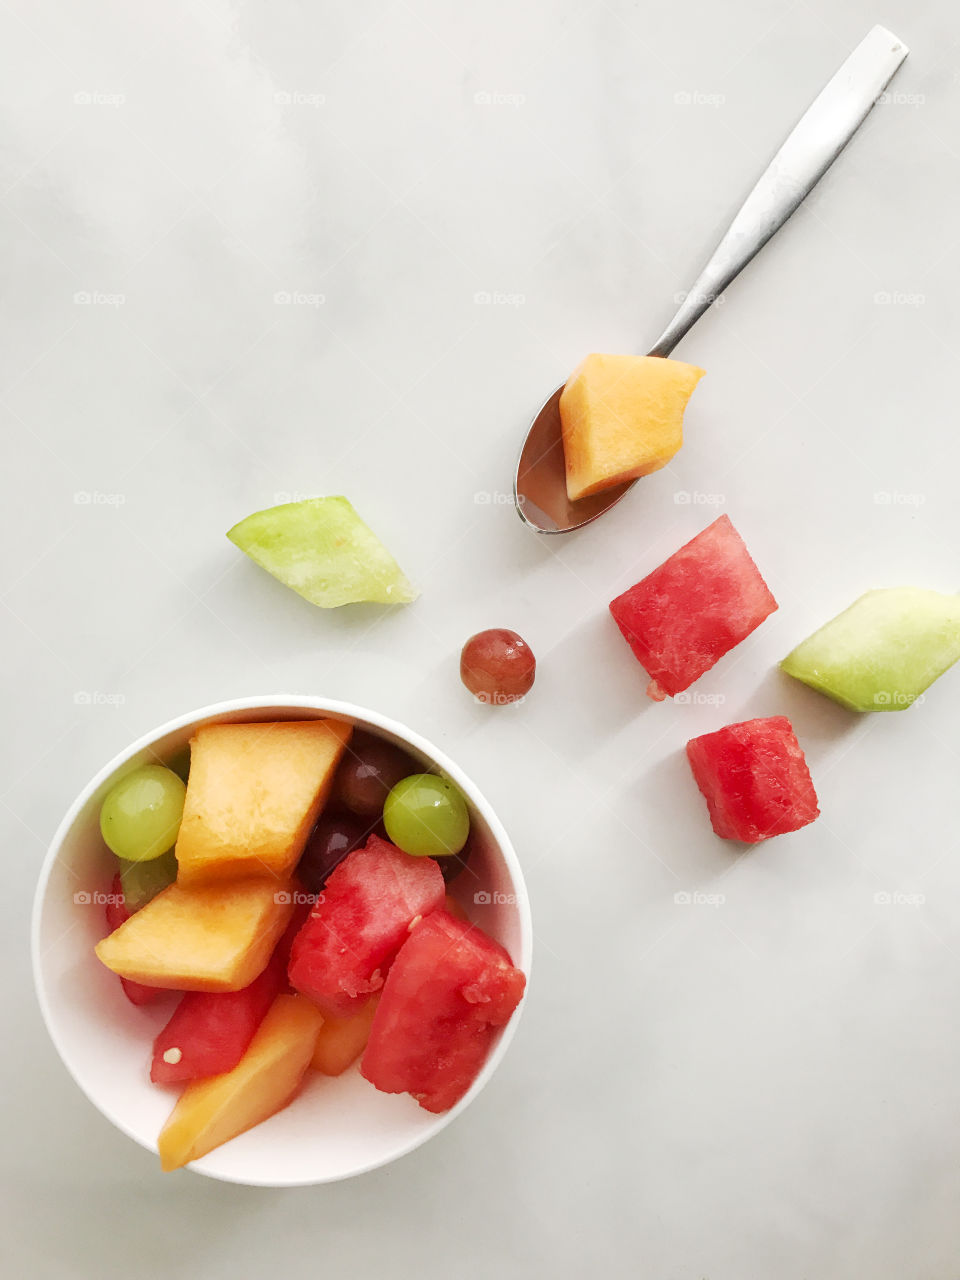 A summertime delicious fruit salad for lunch!!